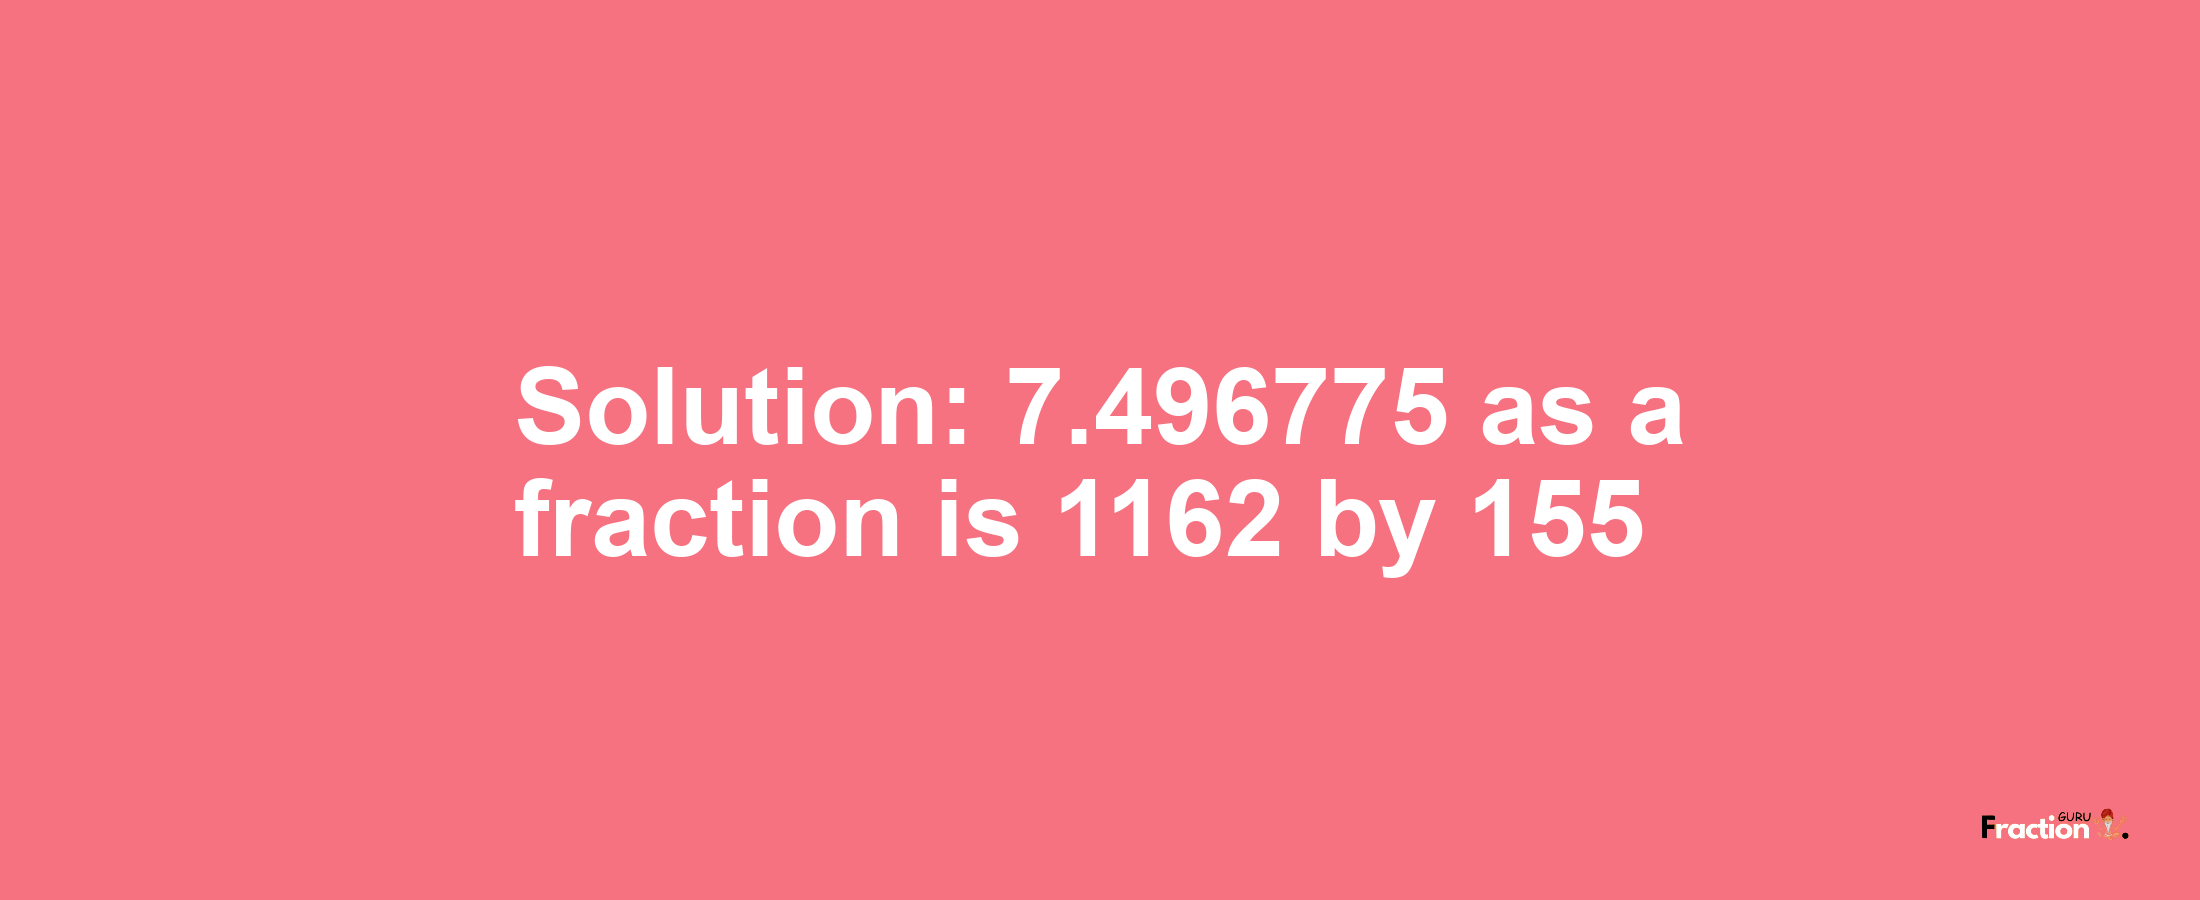 Solution:7.496775 as a fraction is 1162/155